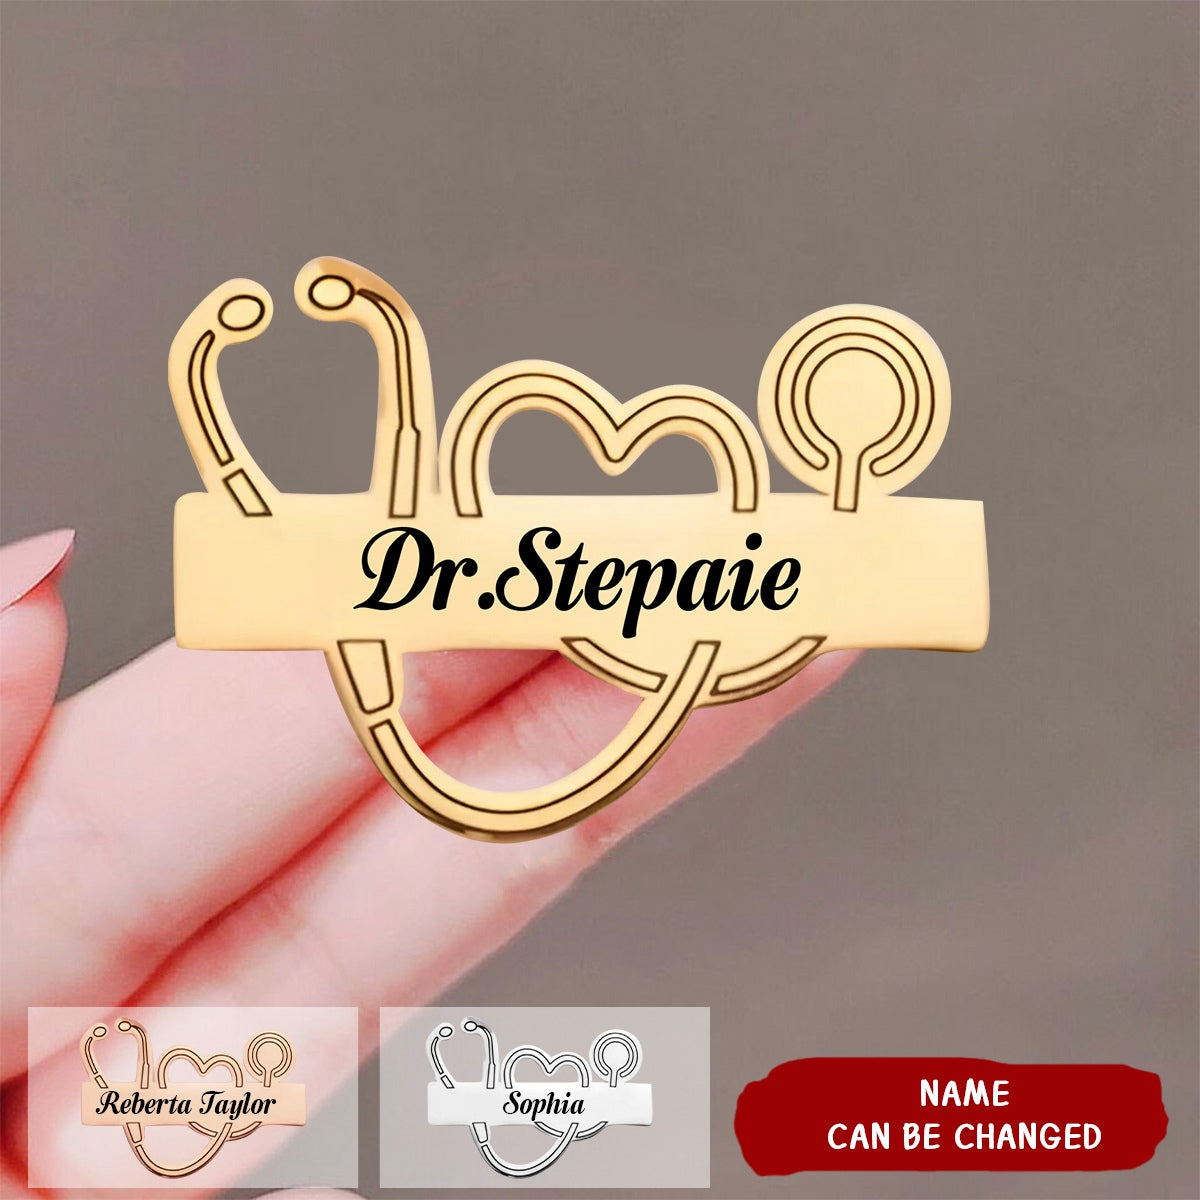 Custom Name Lapel Pin Brooch with Stethoscope Design